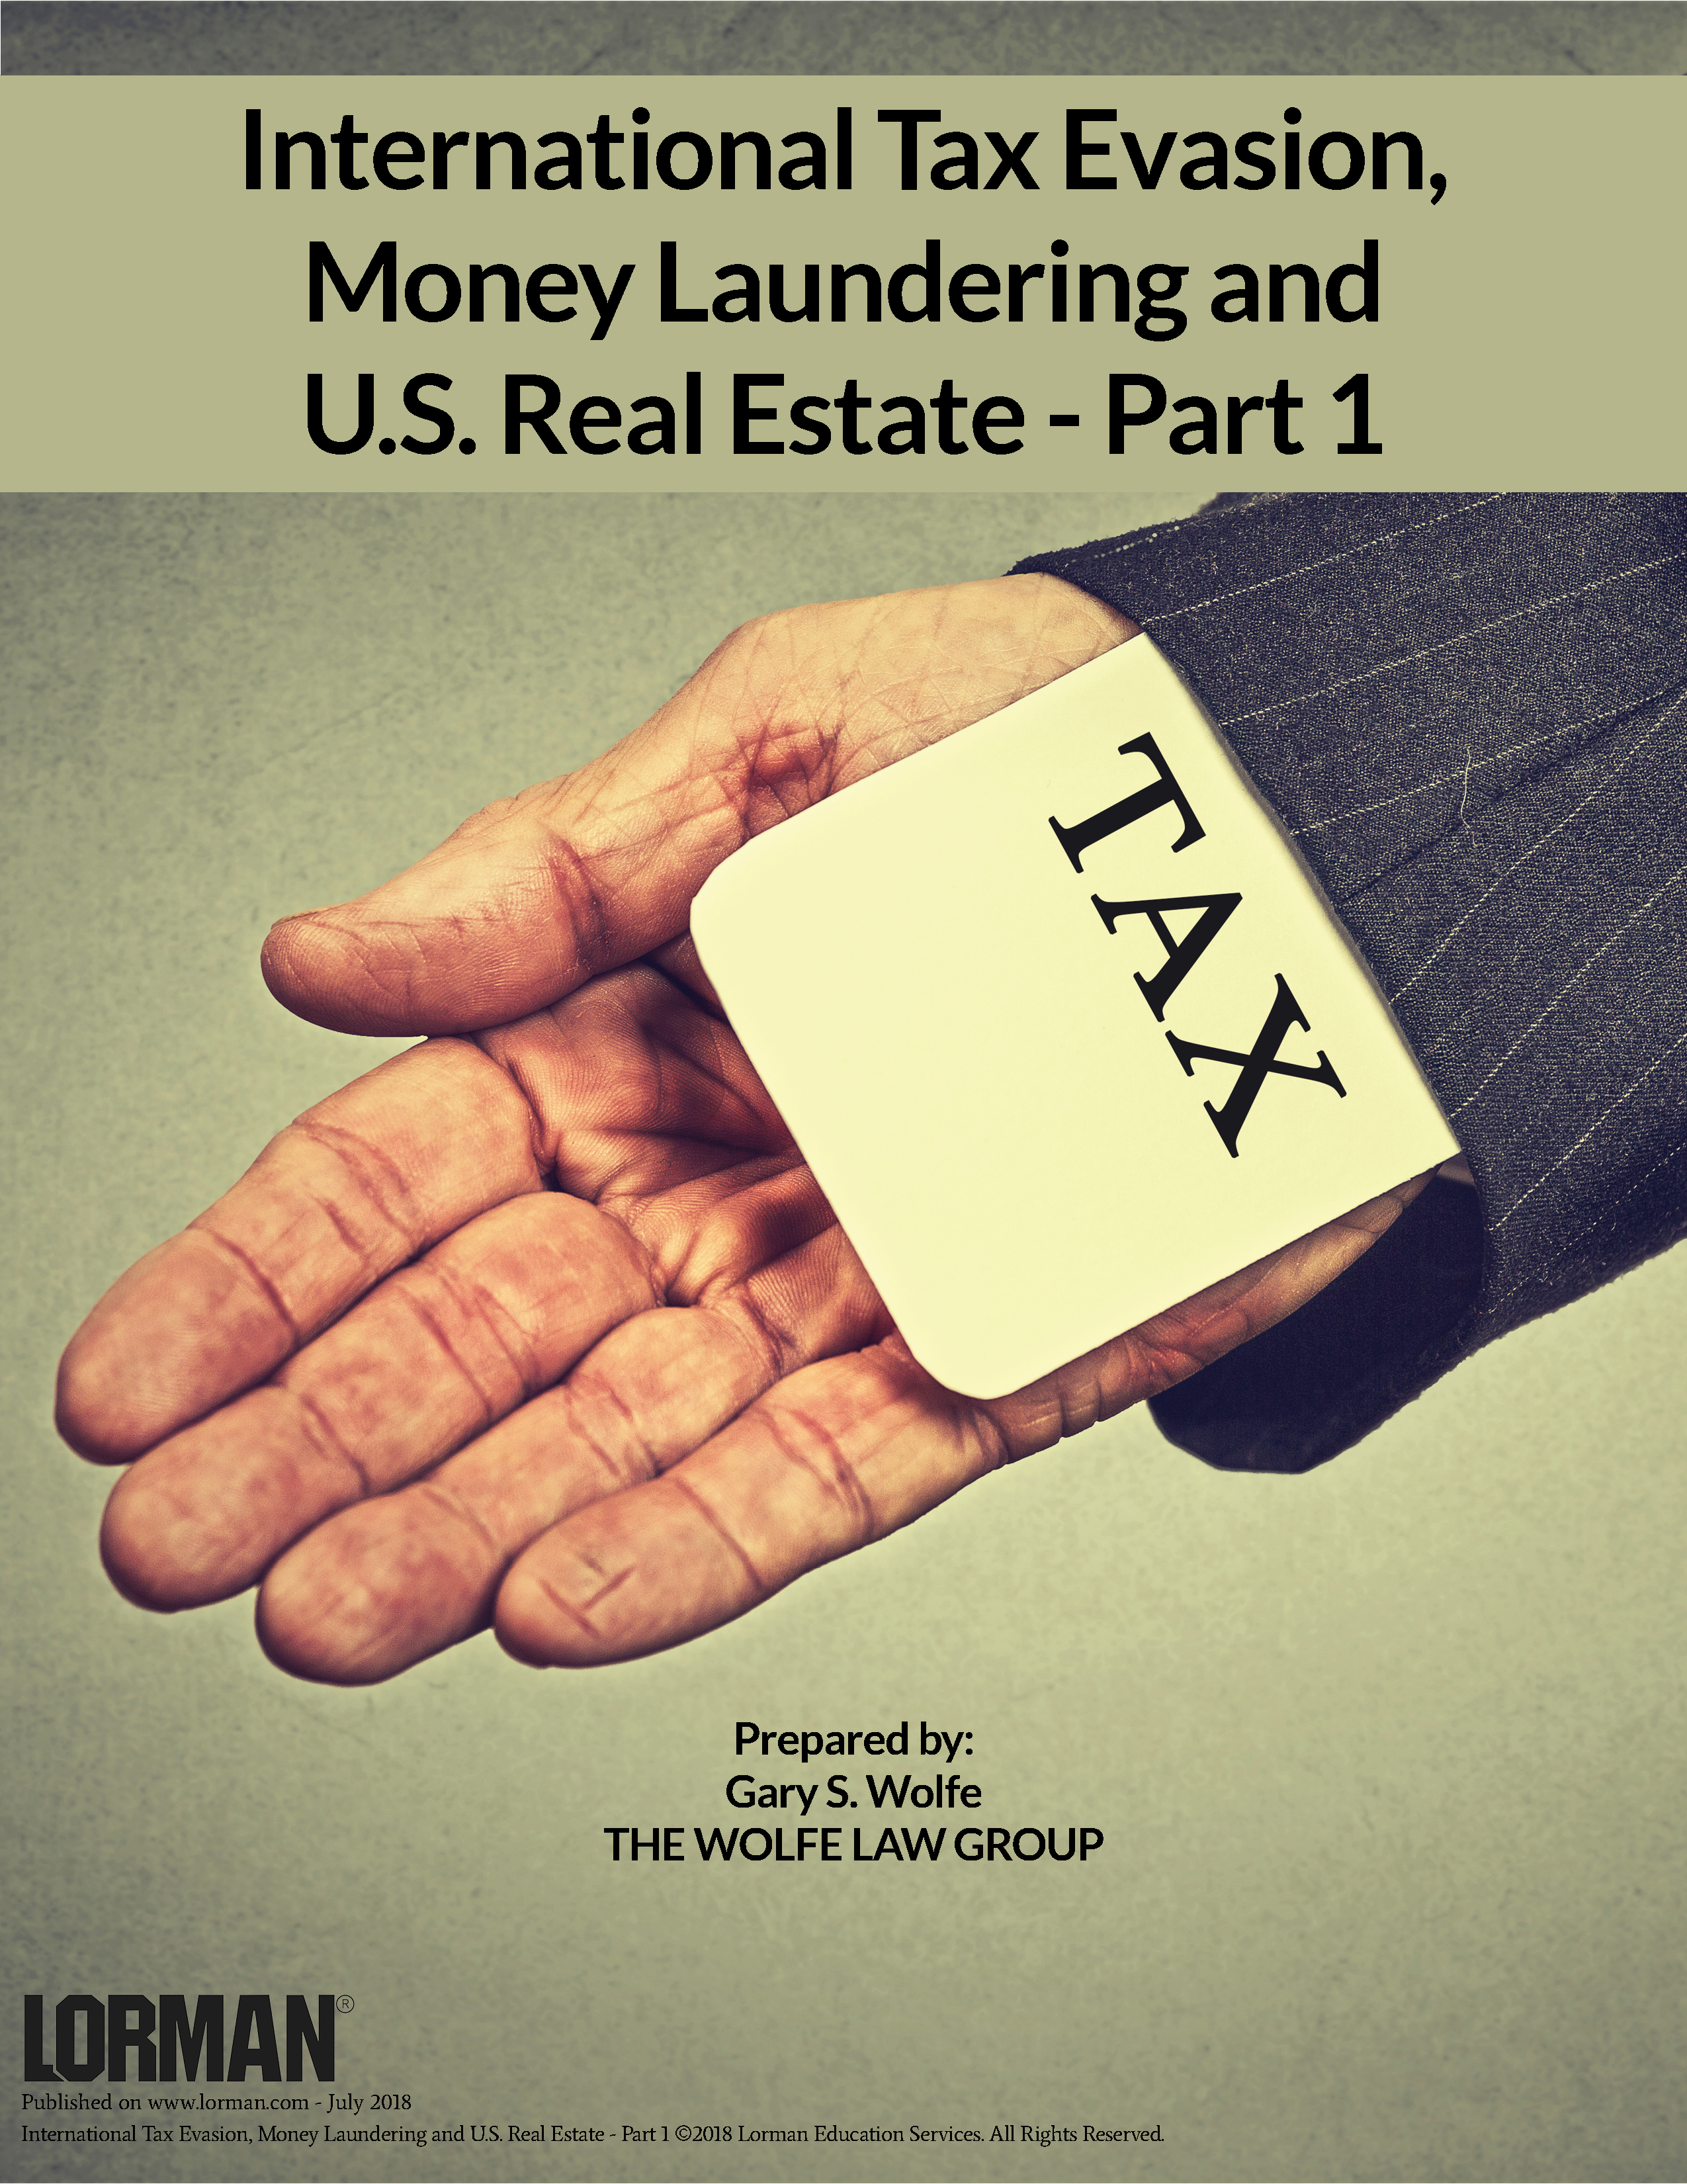 International Tax Evasion, Money Laundering and U.S. Real Estate - Part 1